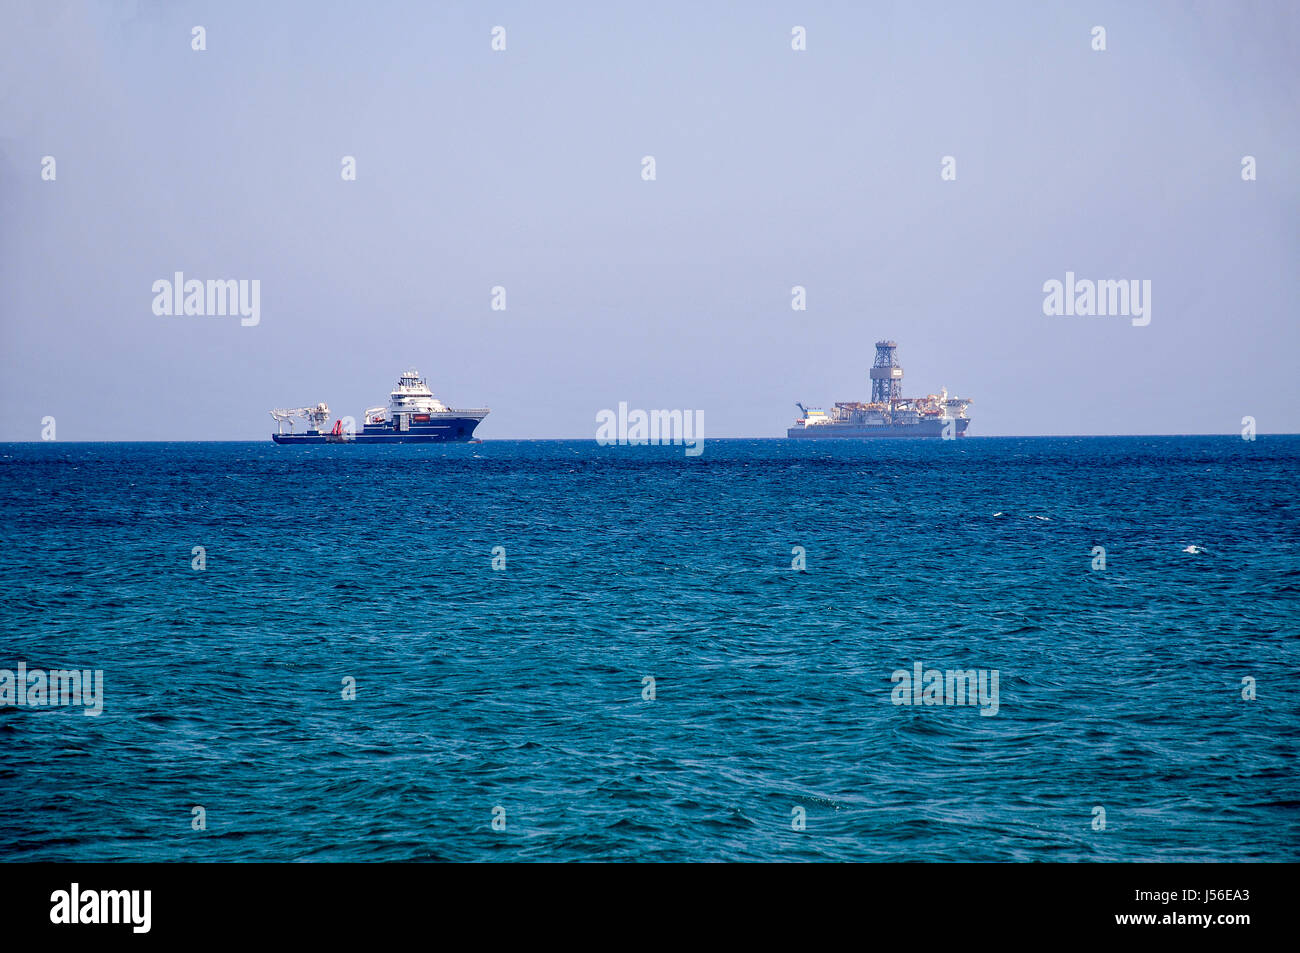 Deep sea Drilling rig of the coast of Limassol Cyprus Stock Photo